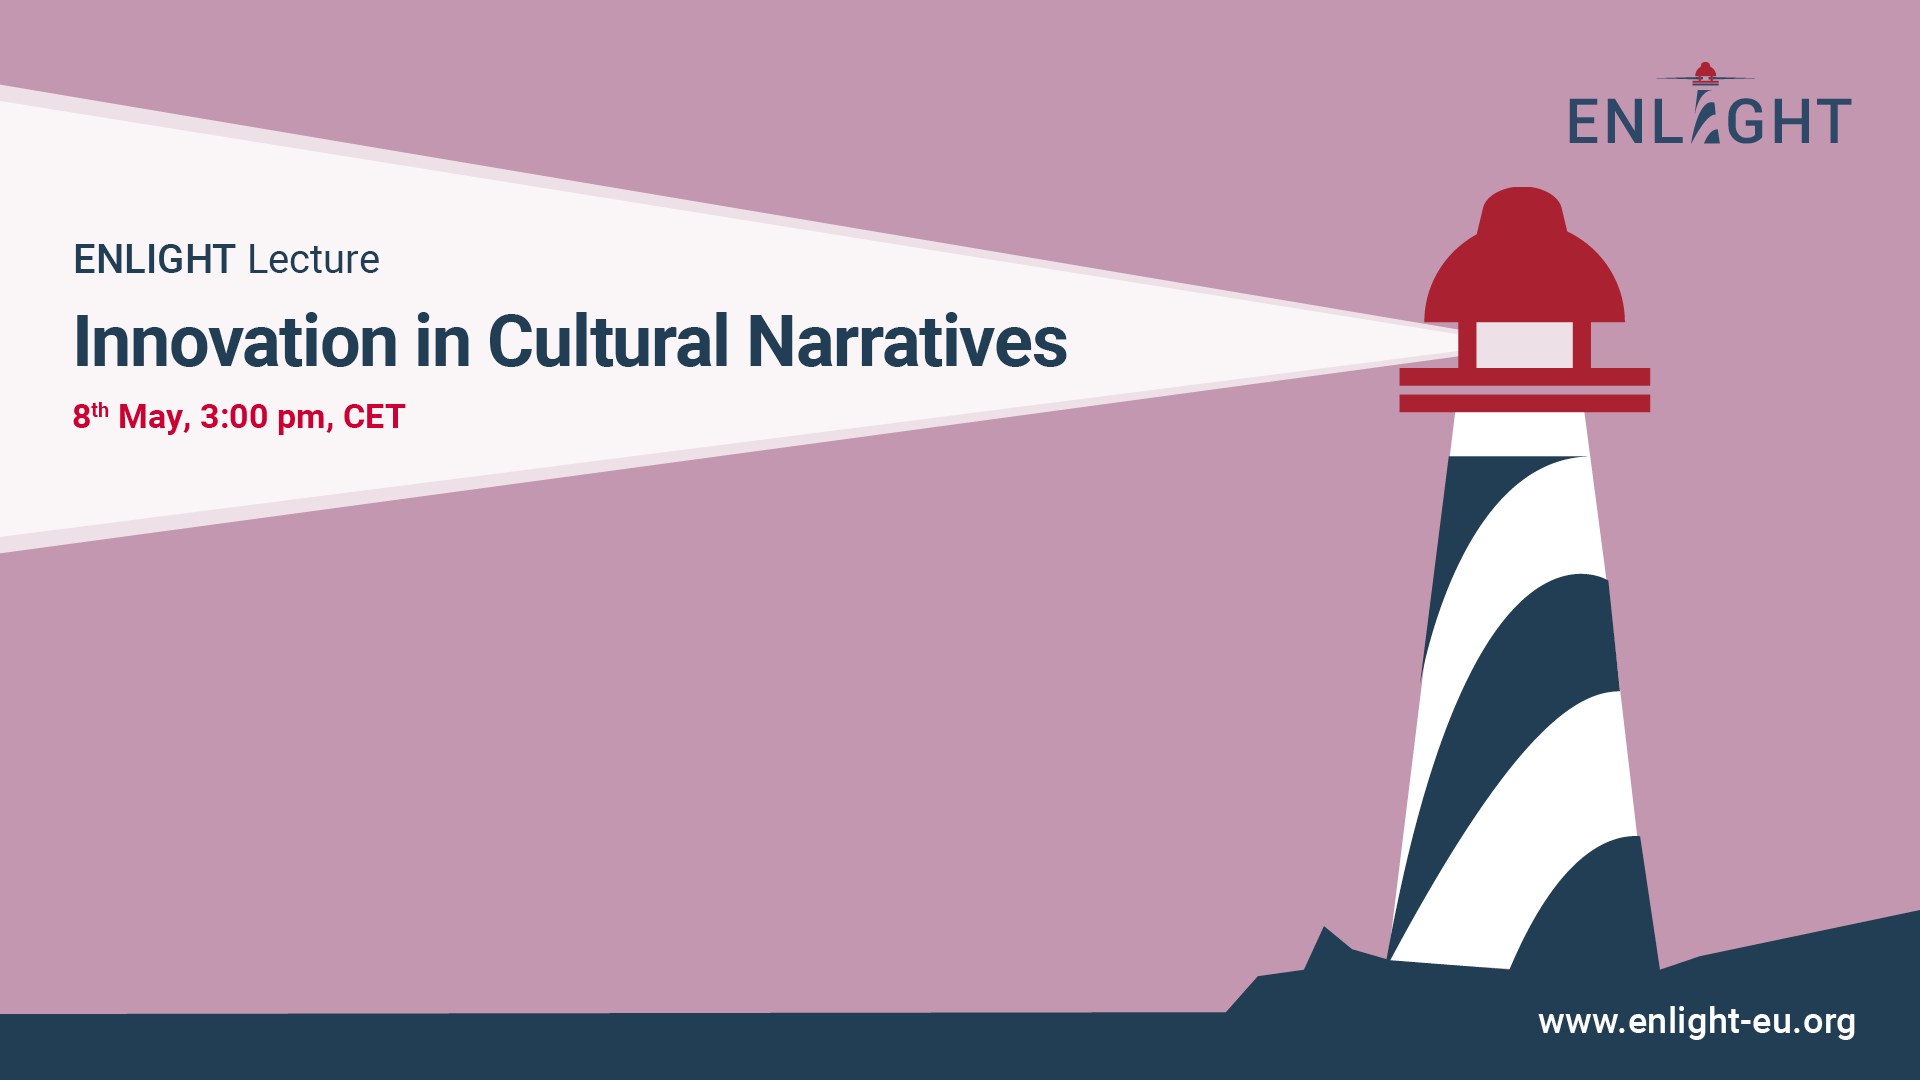  ENLIGHT Lecture Series 'Innovation in Cultural Narratives'  on May 8th, 3pm CET